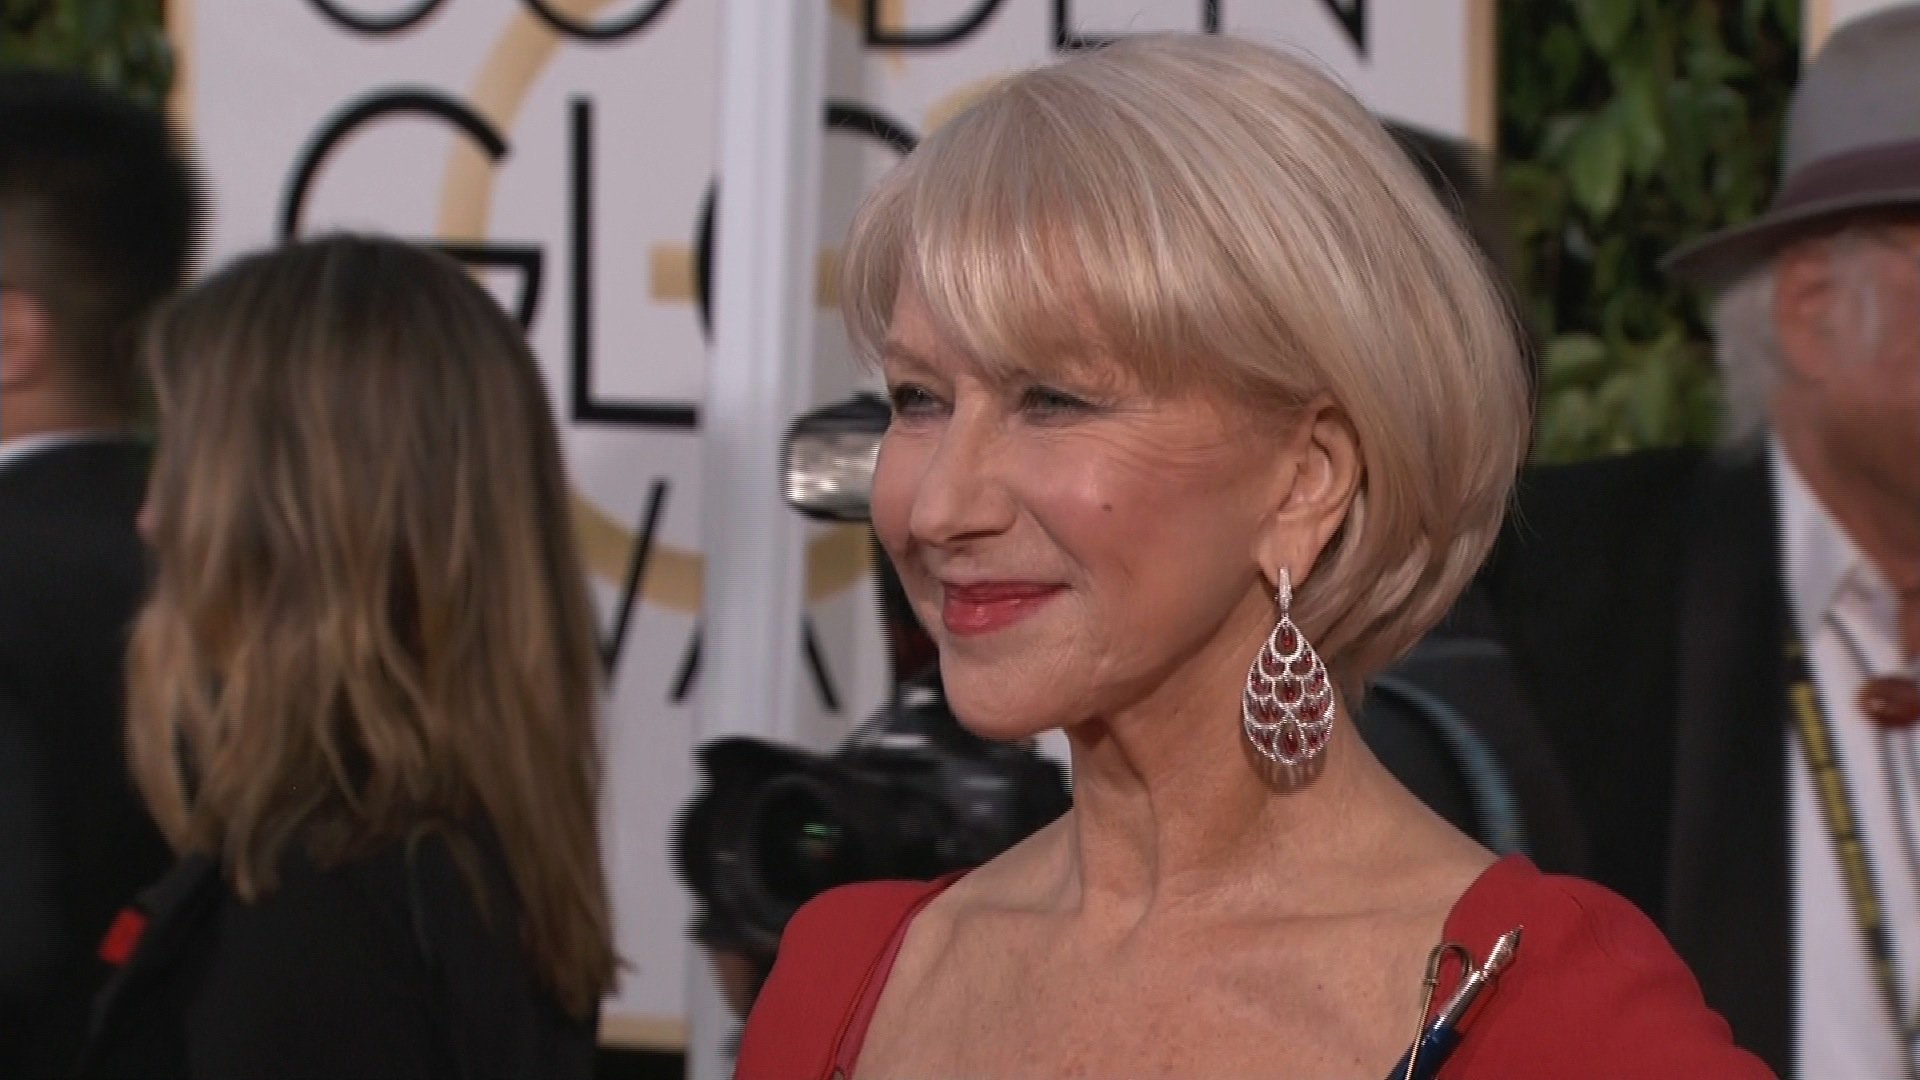 File-Helen Mirren on the red carpet before the 2015 Golden Globe Awards in Los Angeles, CA, January 11, 2015.